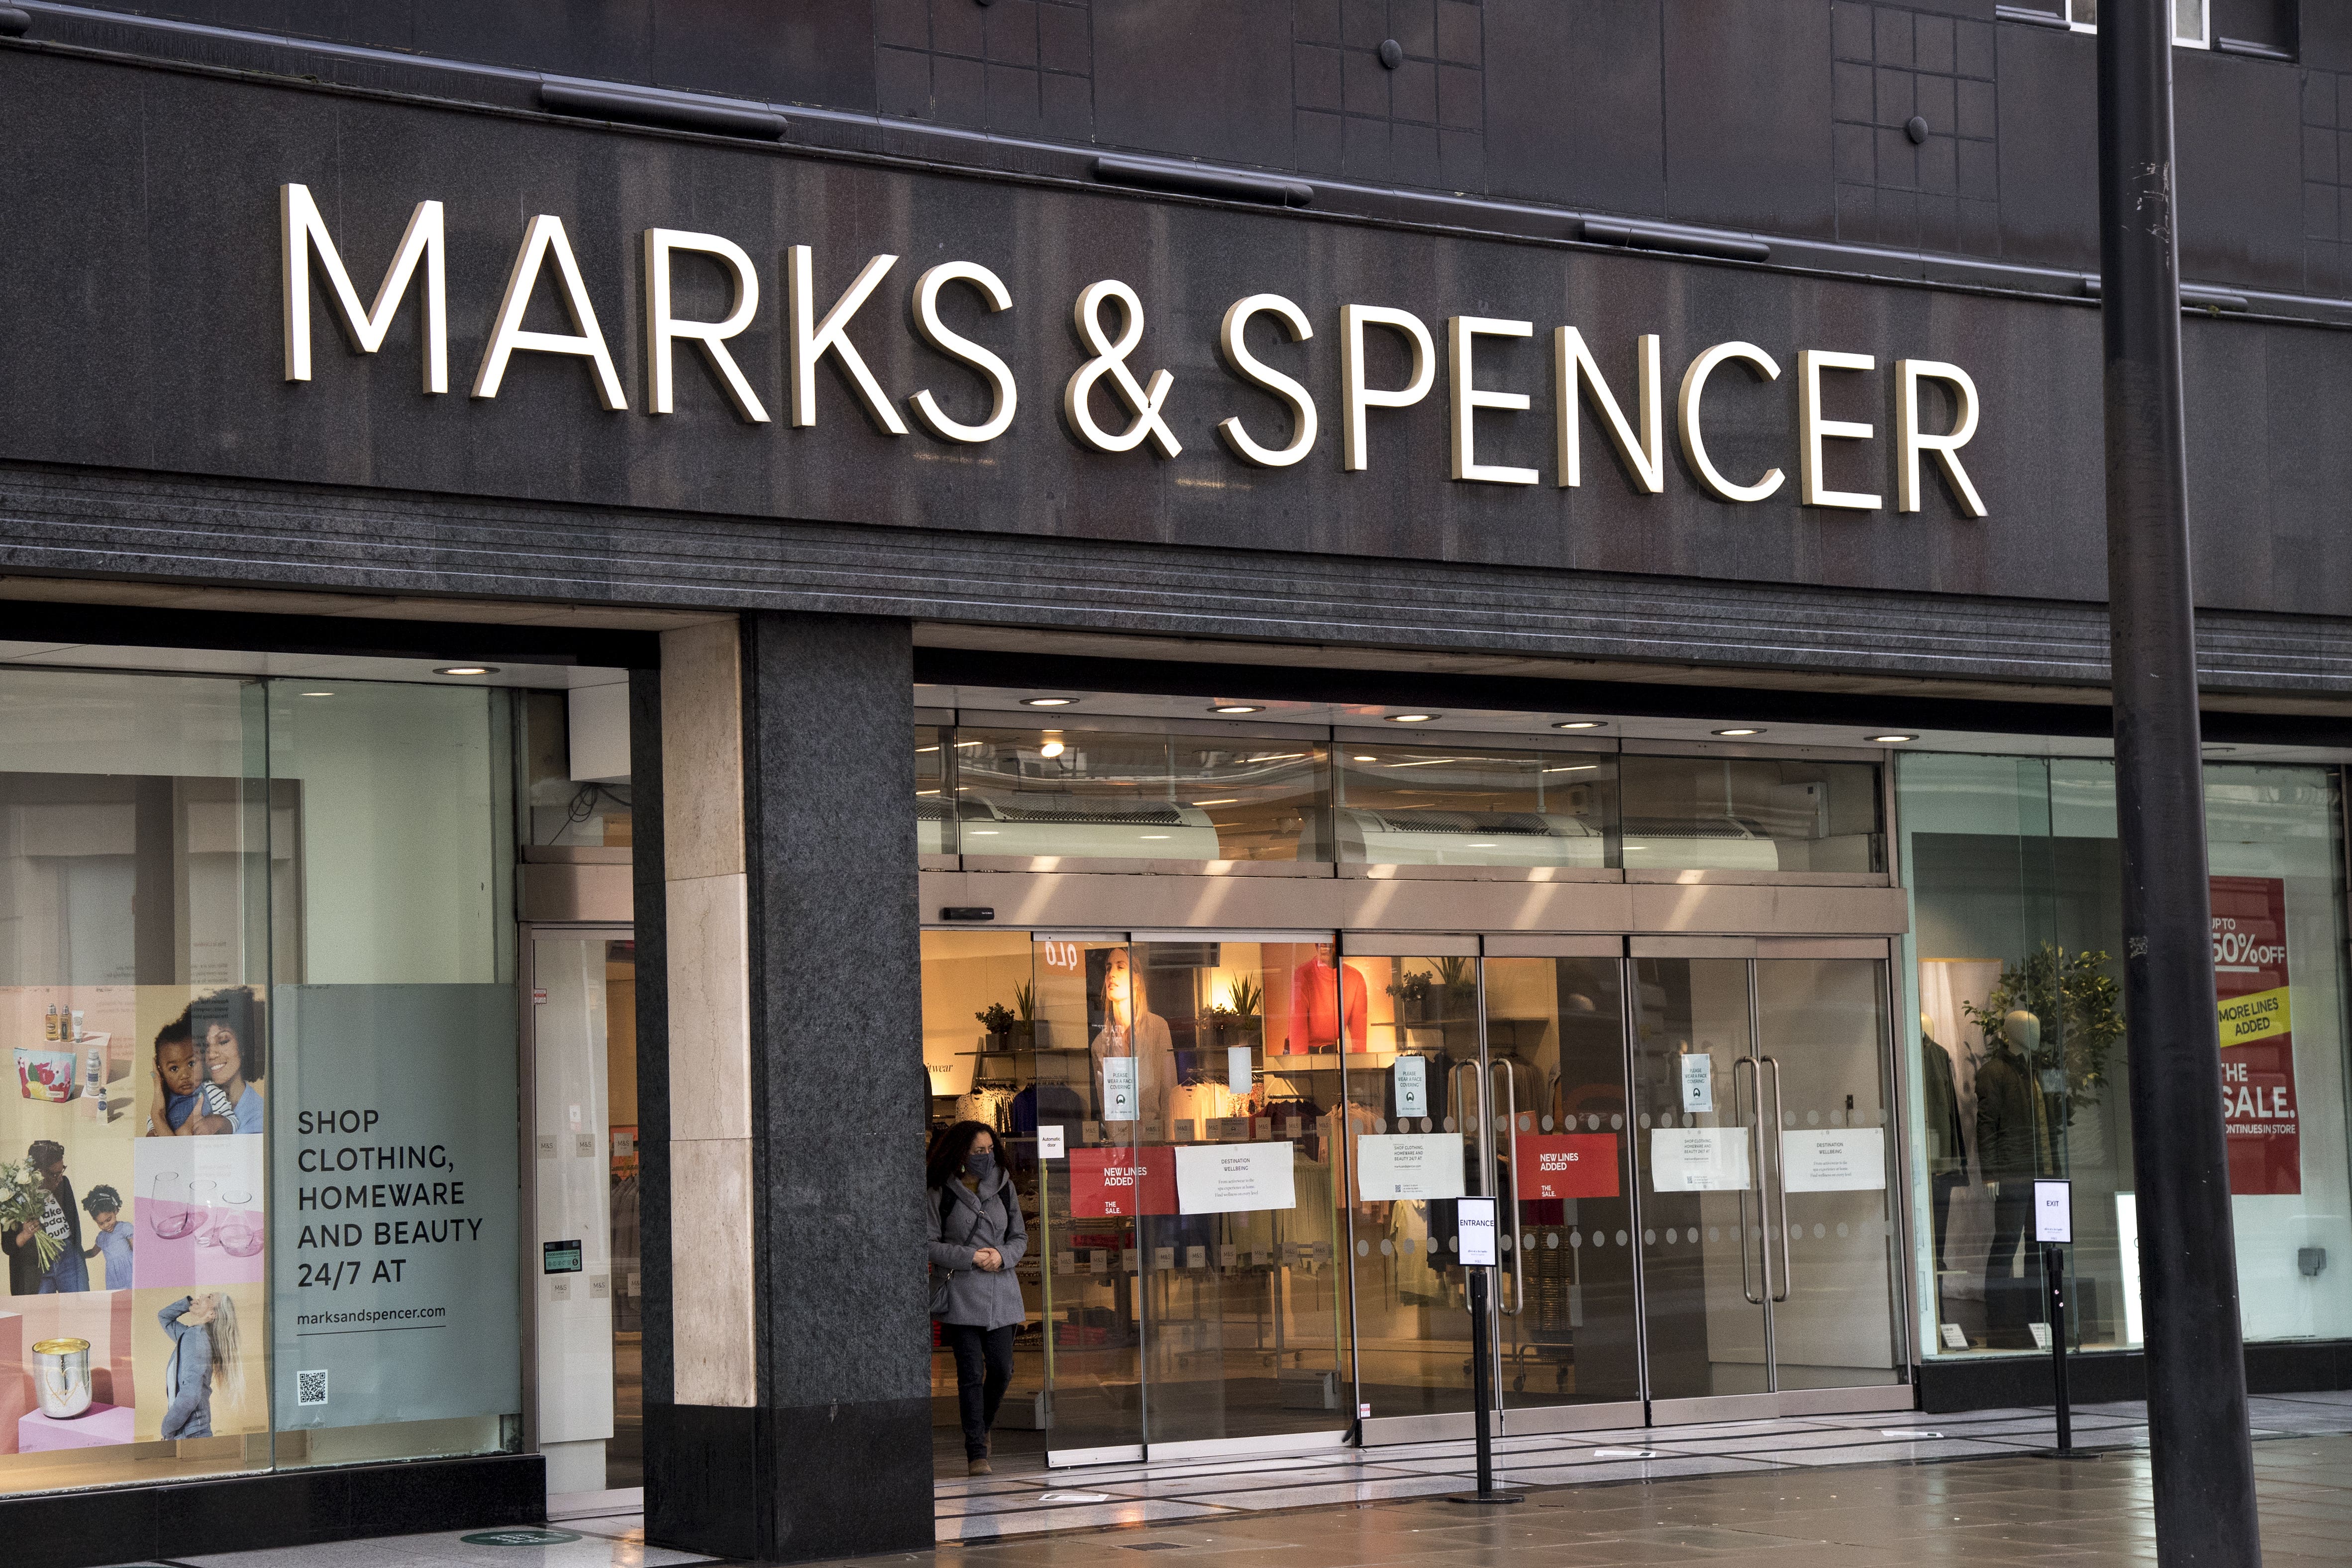 Marks & Spencer has reported bumper profits